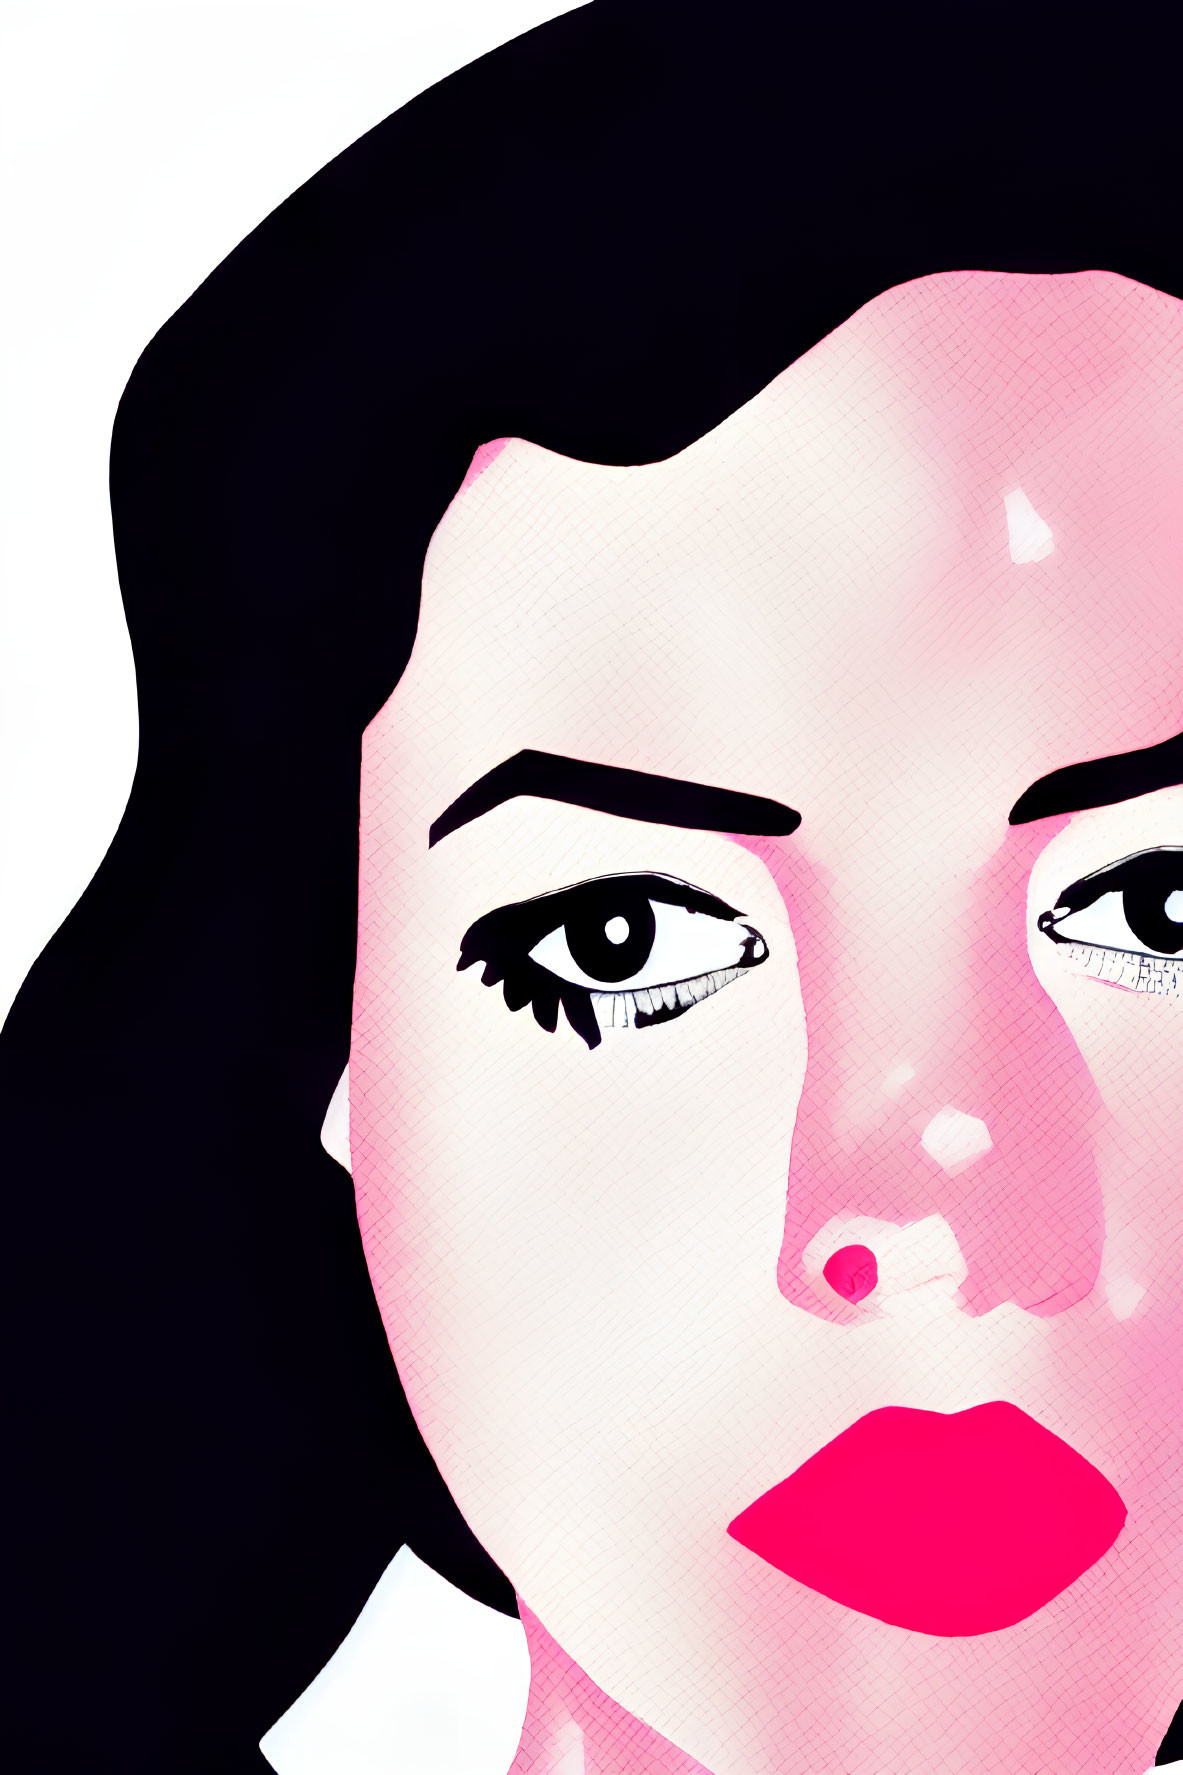 Detailed graphic illustration of a woman with bold red lips and prominent eyelashes in limited pink and black colors